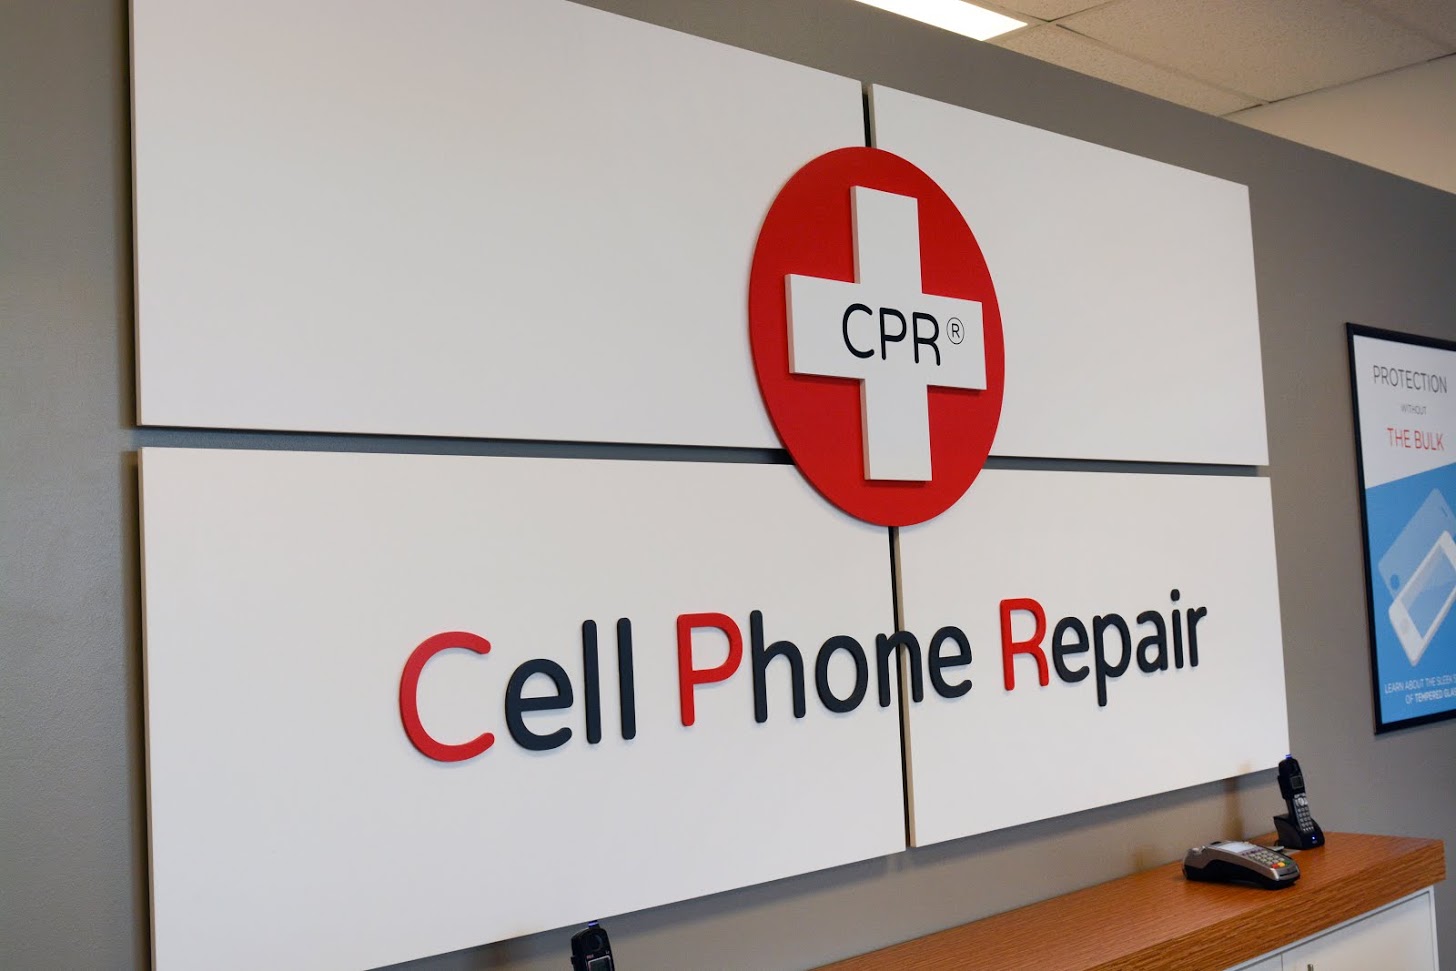 CPR Cell Phone Repair, Monday, February 11, 2019, Press release picture